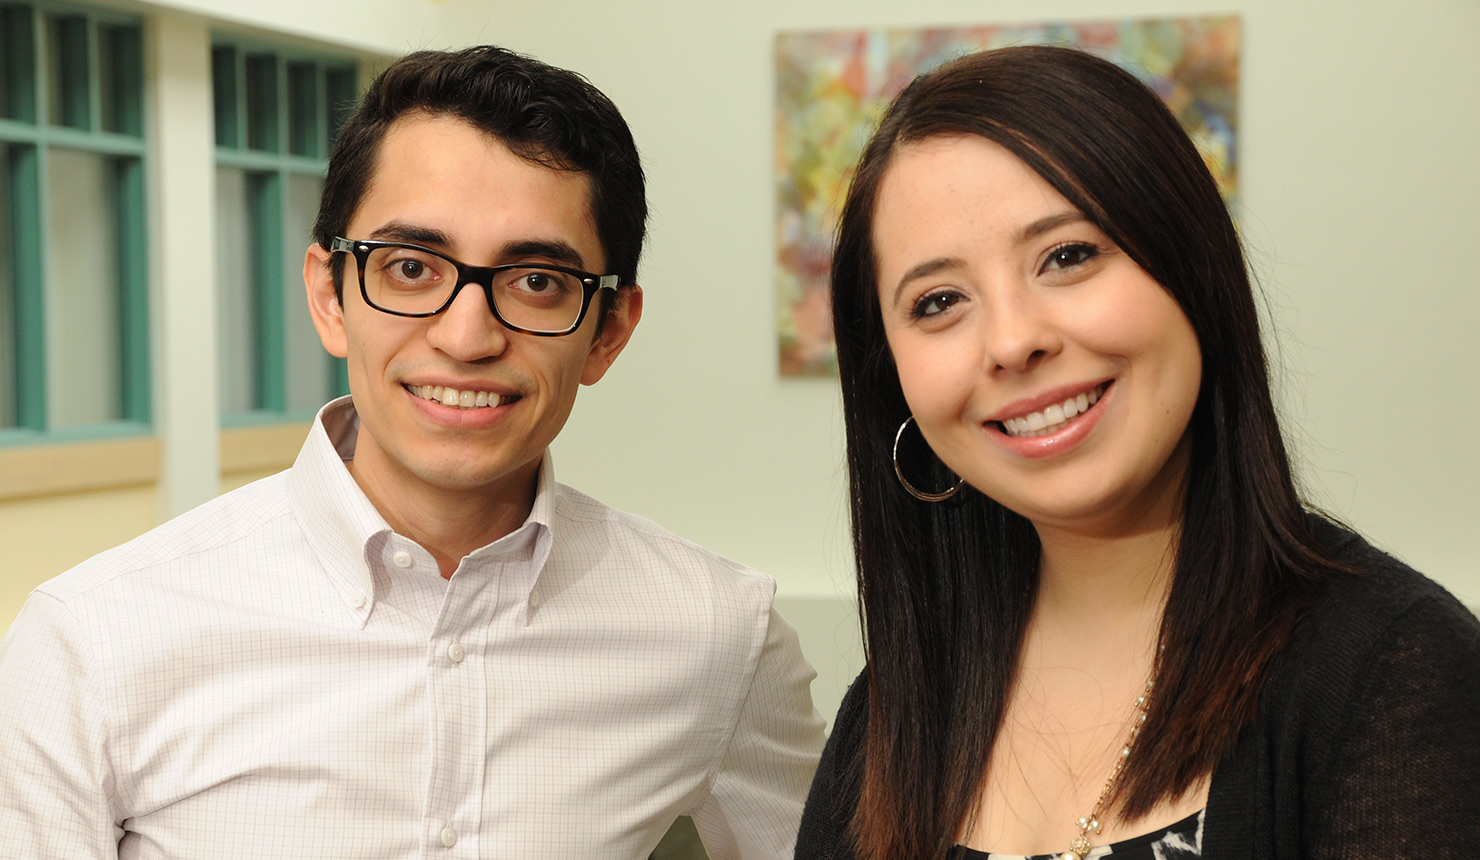 By establishing a first-ever Latino Medical Student Association Northeast chapter at Geisel School of Medicine, Freddy Vazquez '18 and Adrianna Stanley '18 are ambassadors for Geisel's growing Latino community. (Photo by Jon Gilbert Fox)